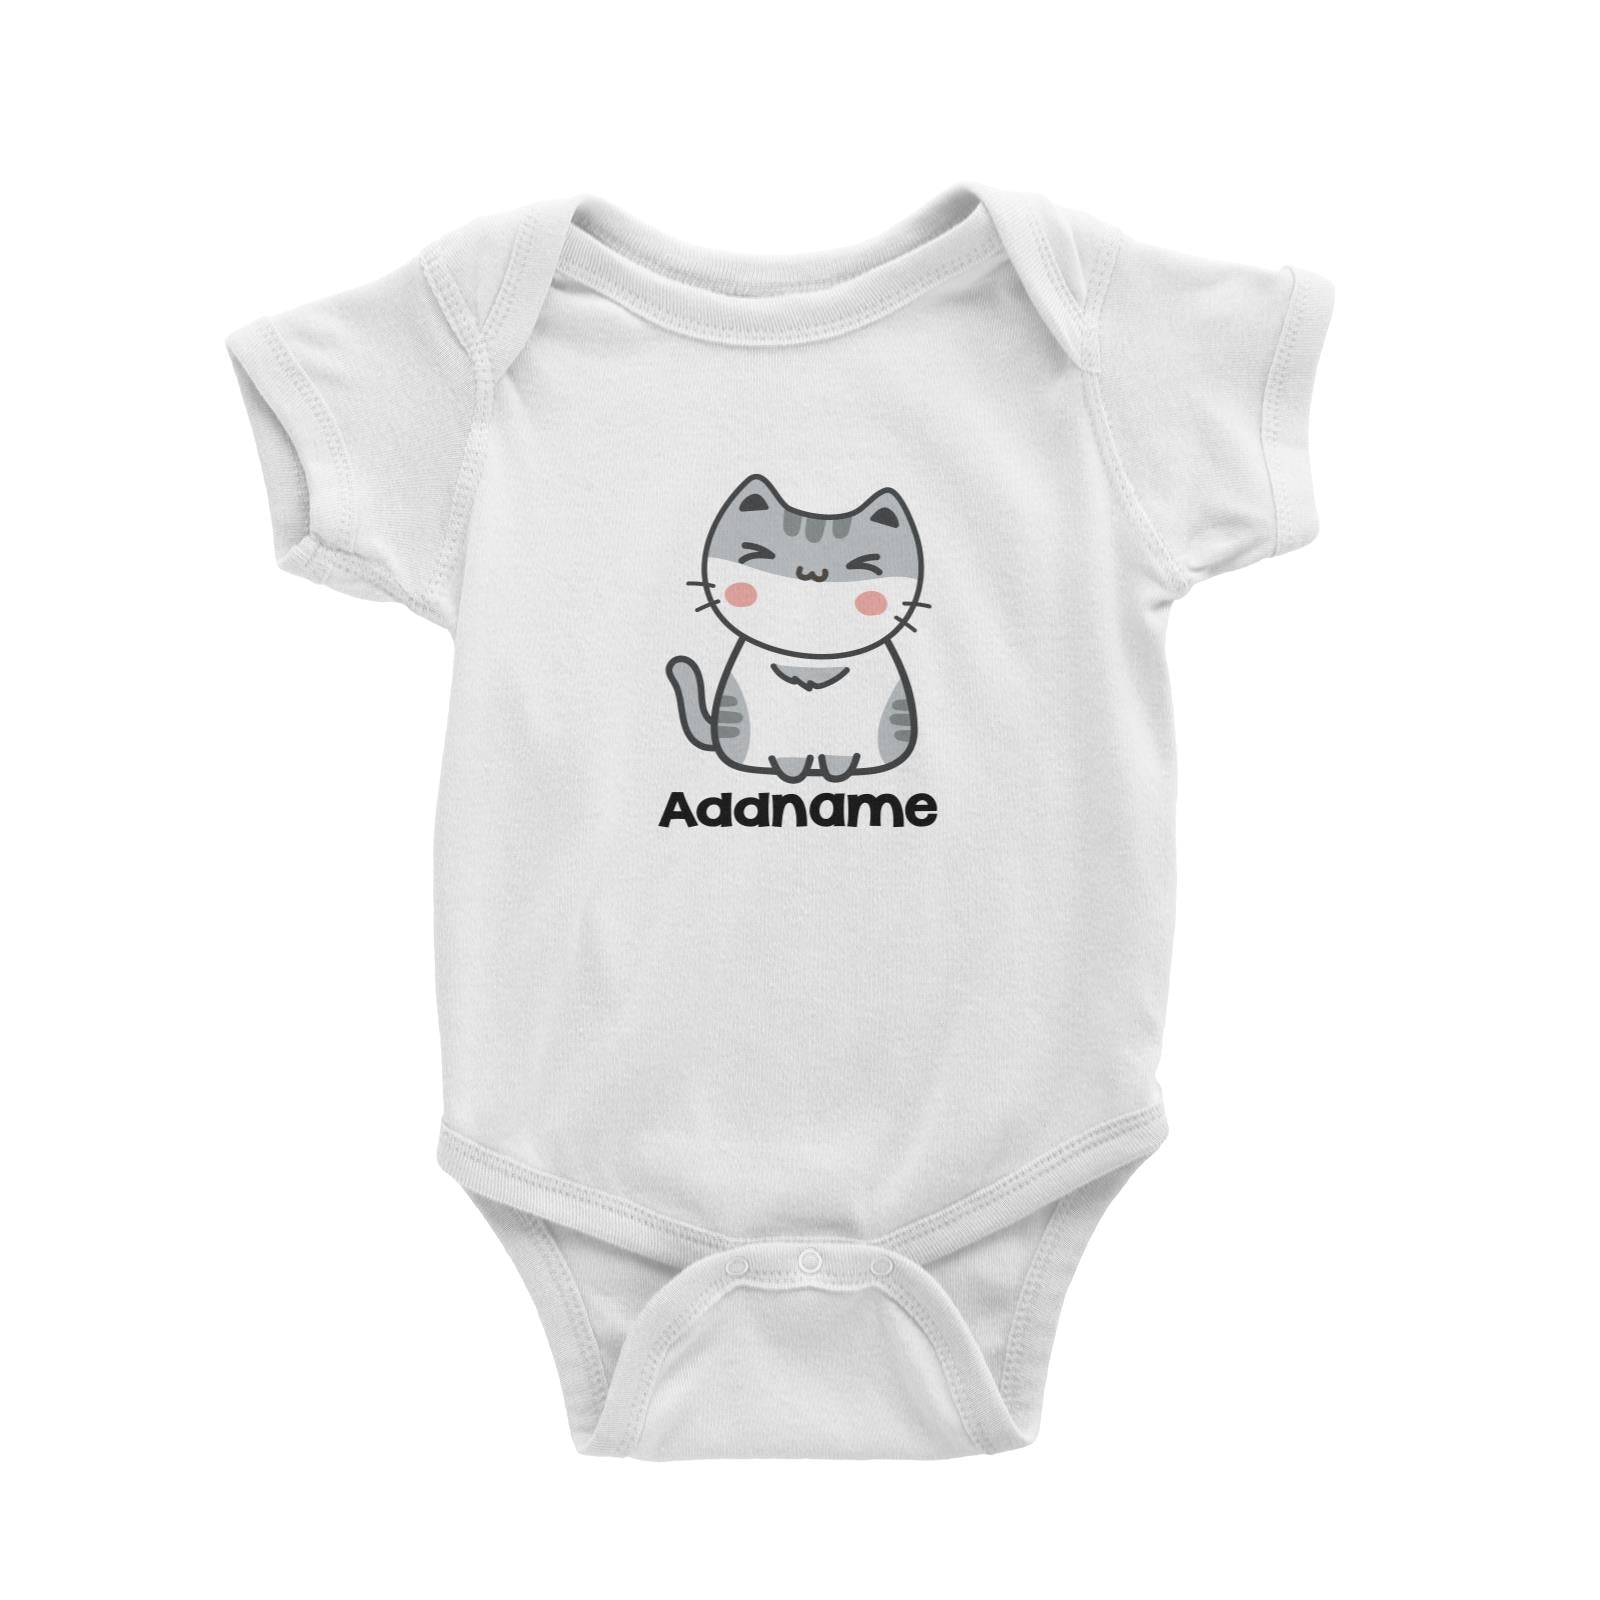 Drawn Adorable Cats White & Grey Addname Baby Romper